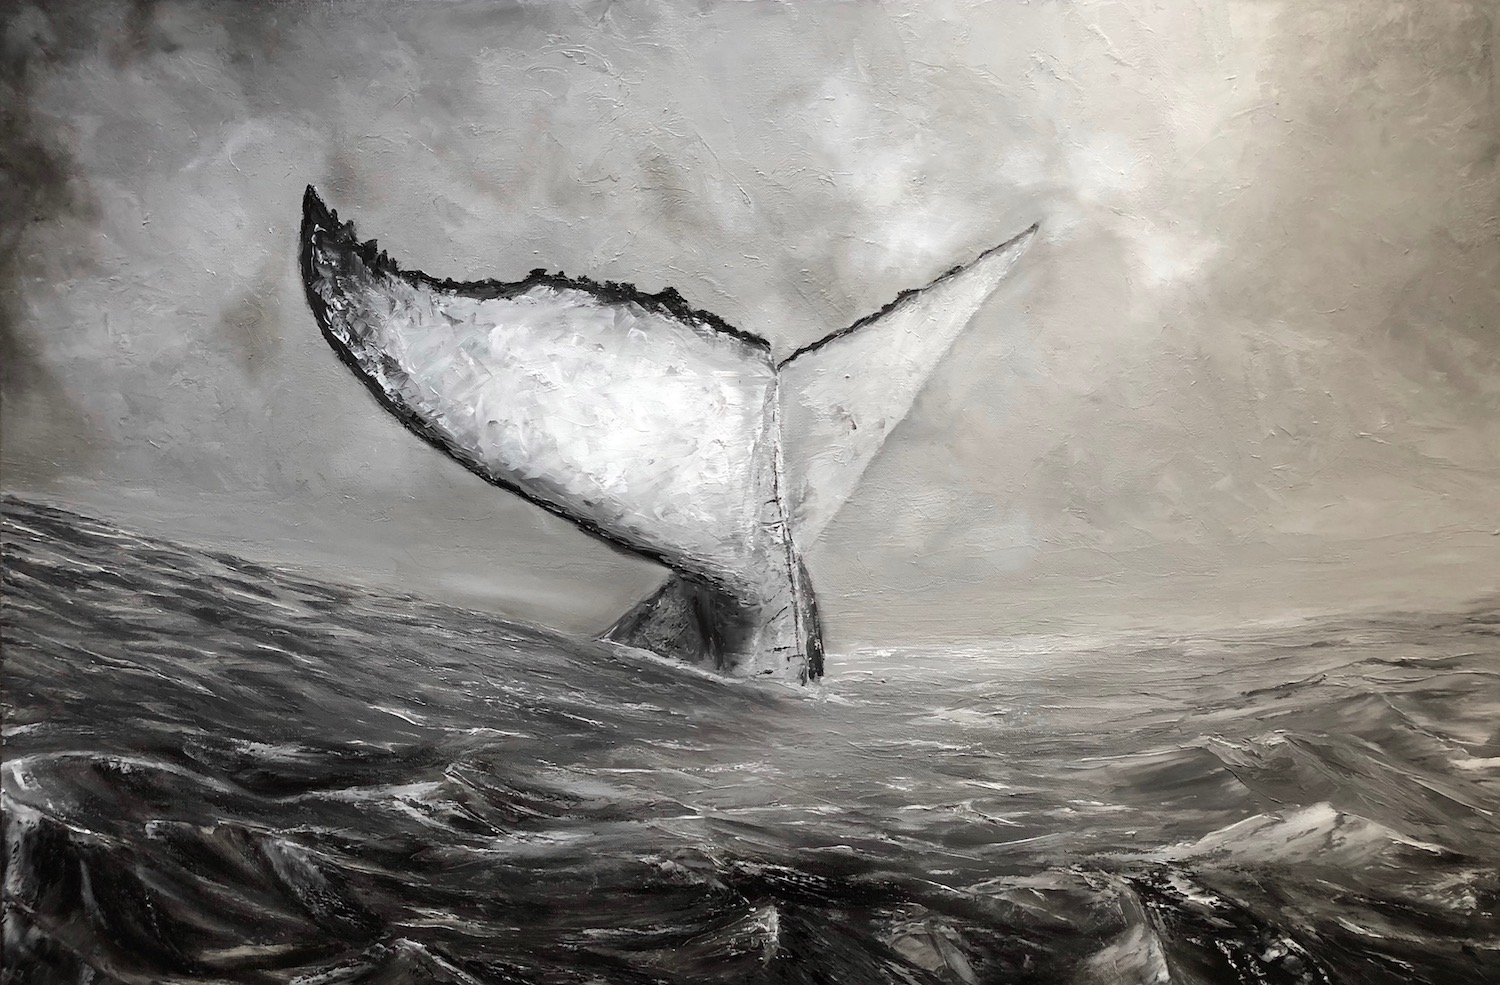 Whale Tail Noir (Black and White Monochrome) Original Oil Painting of Stormy Ocean and Humpback Whale